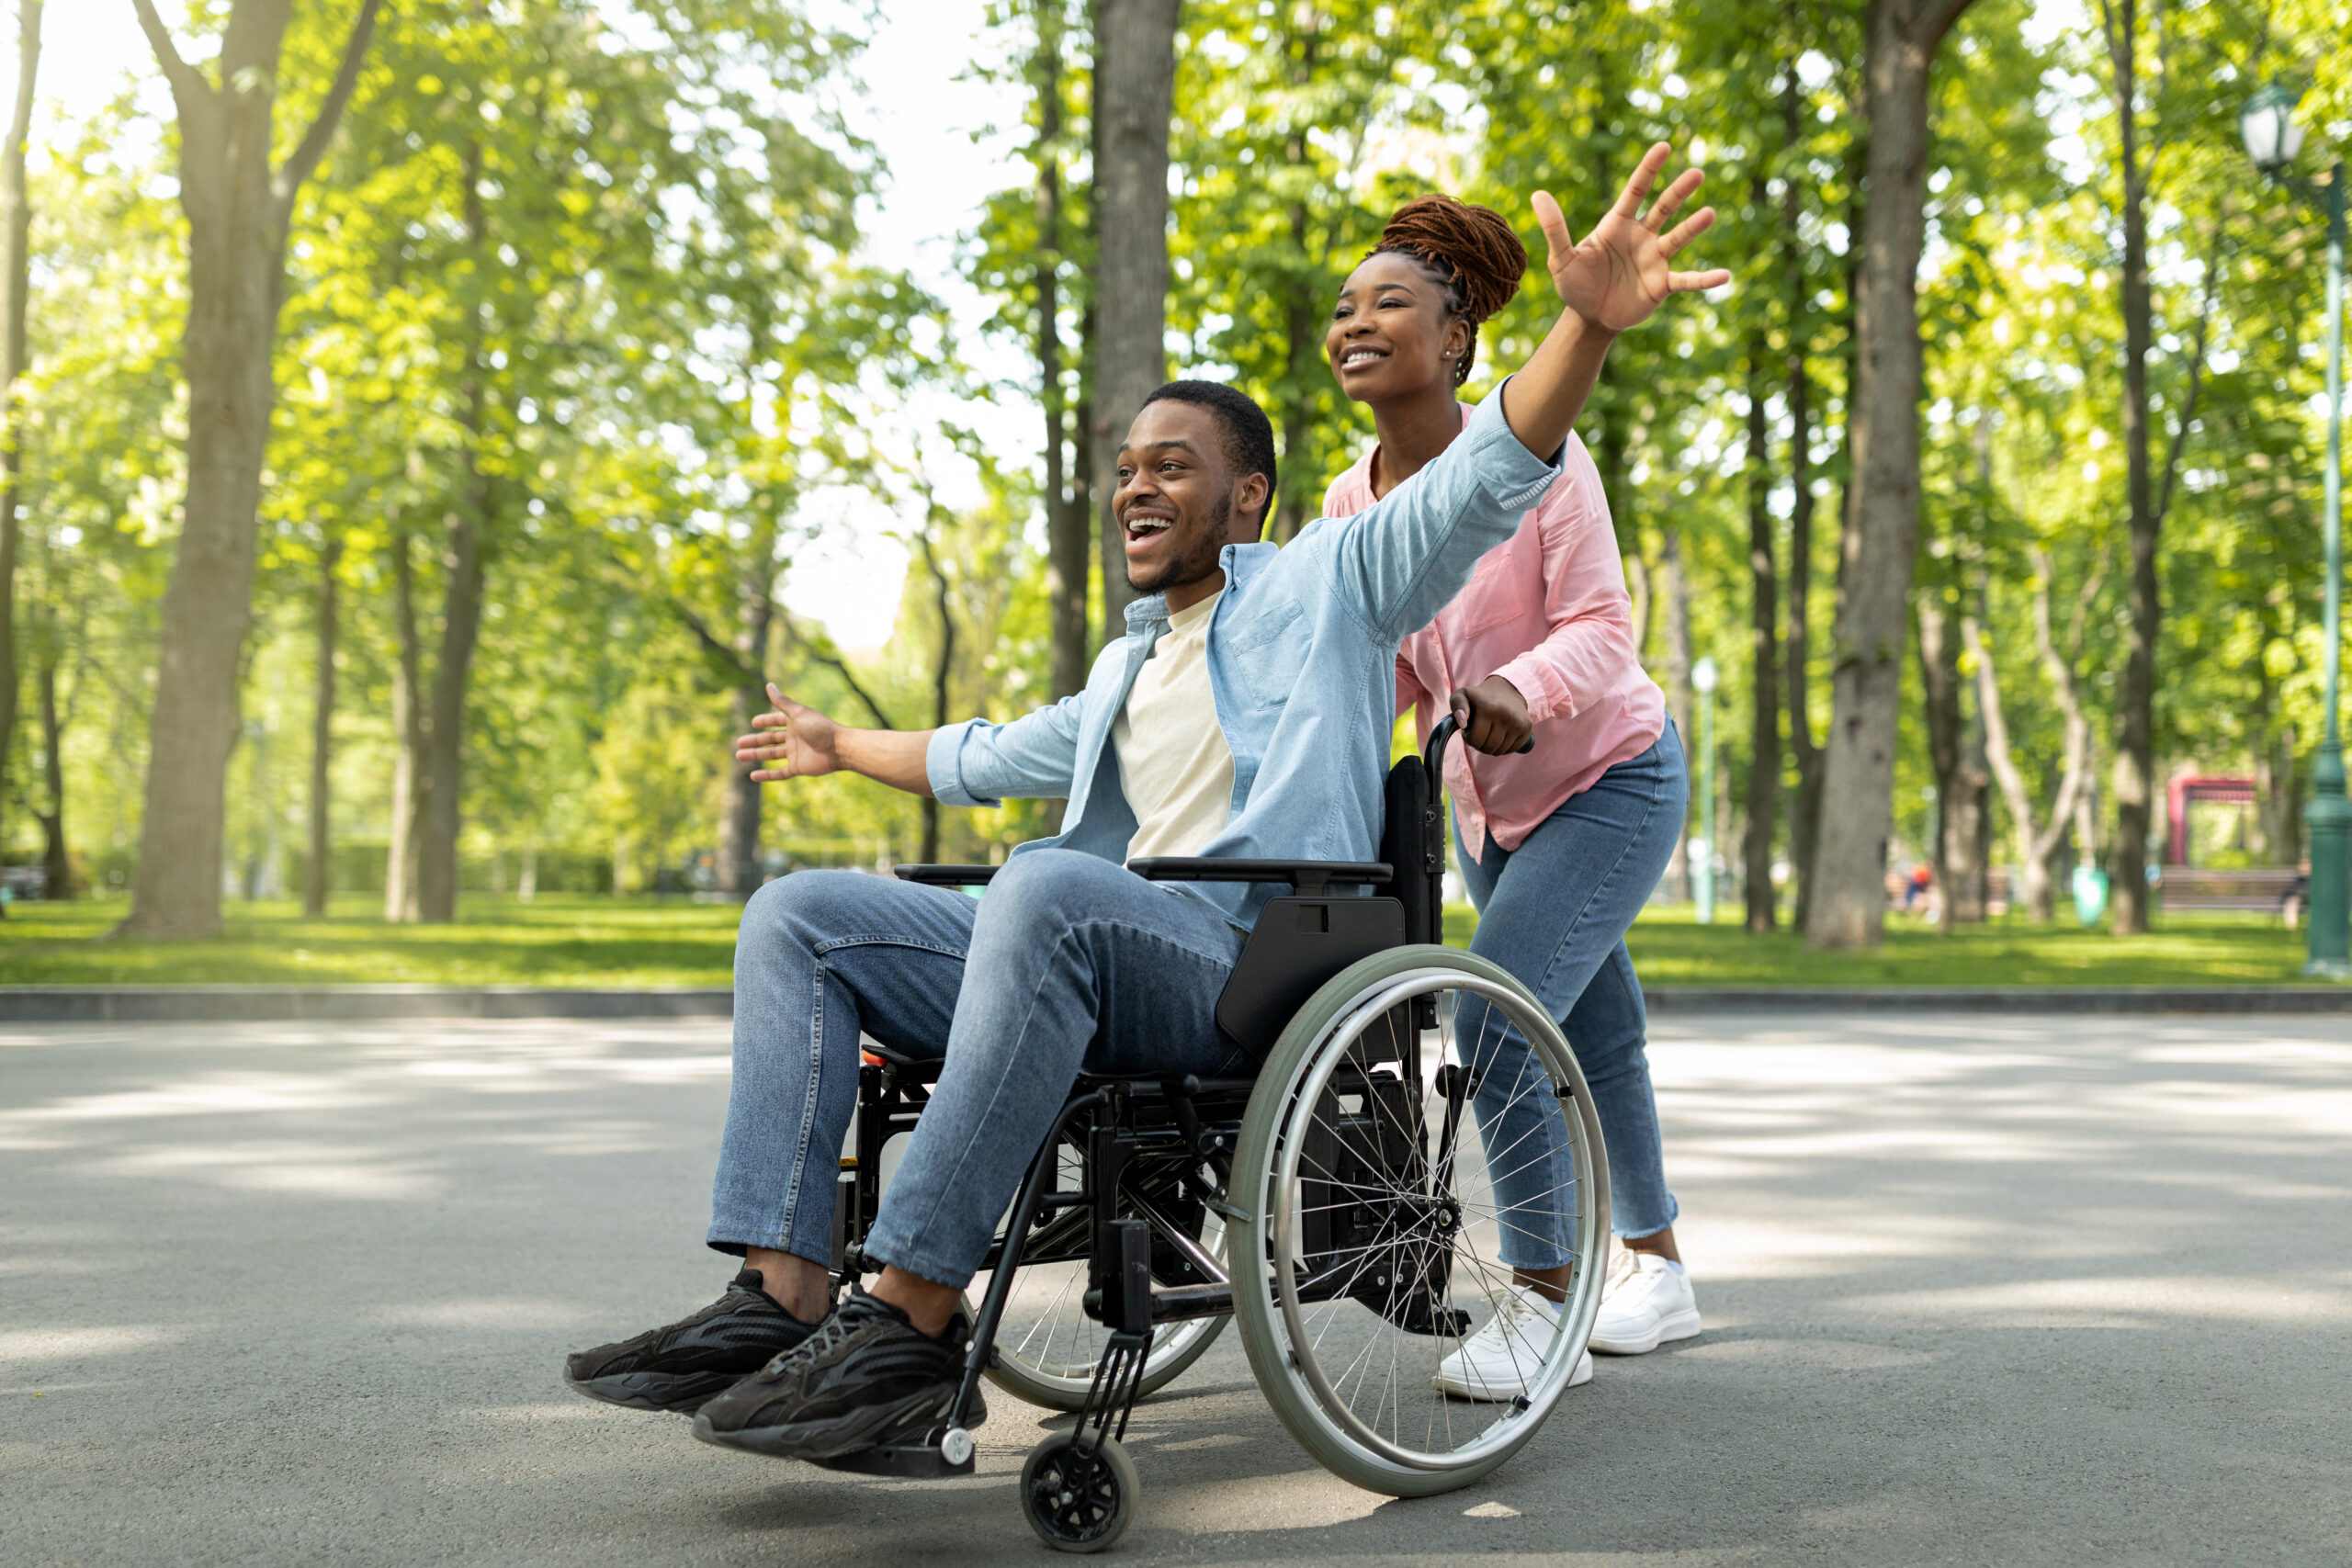 Happy Black Disabled Guy In Wheelchair On Walk With His Loving Girlfriend Outdoors Having Fun Spending Time Together